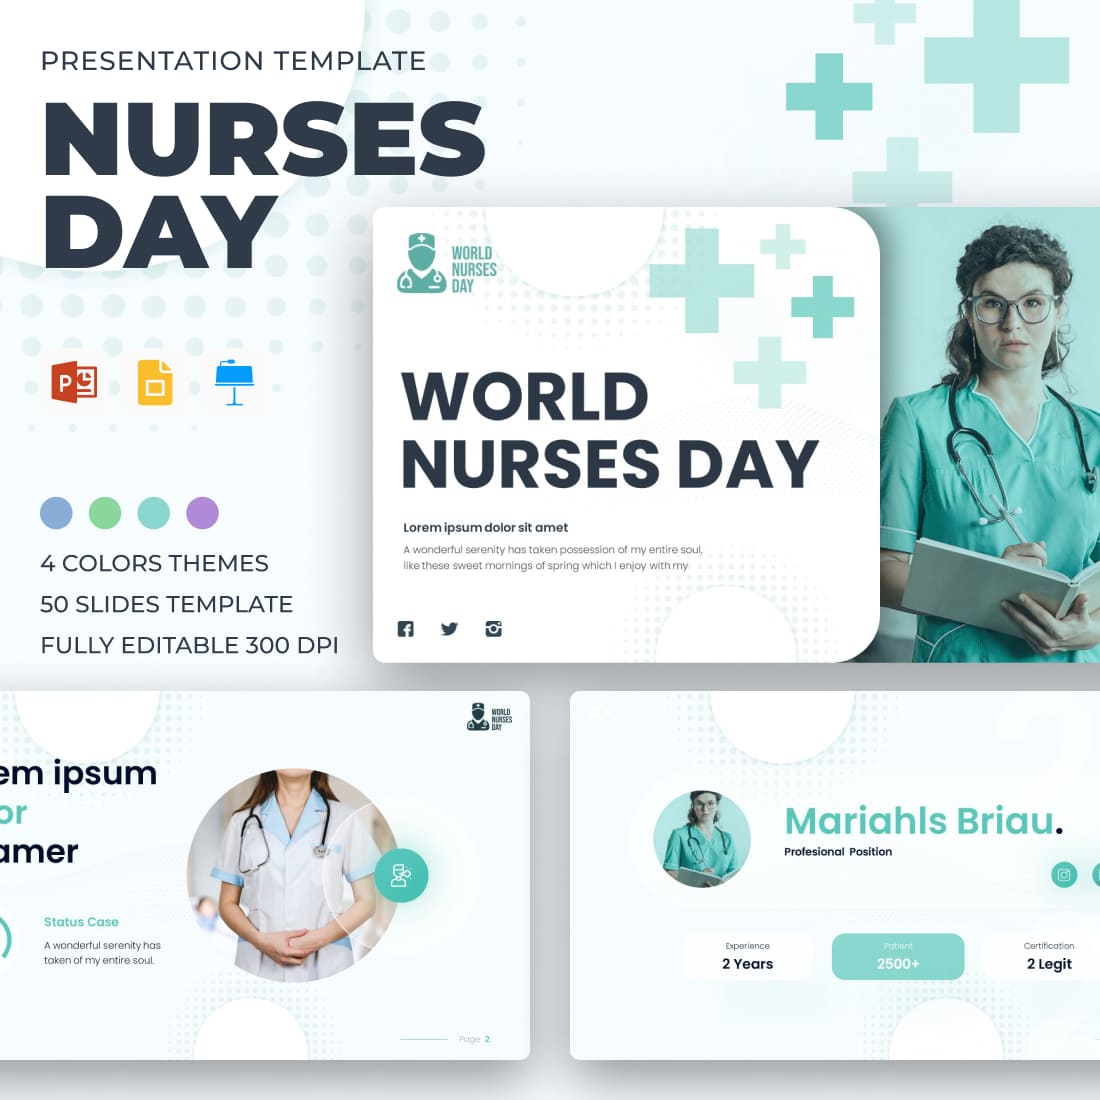 Nurses Day Presentation template - main image preview.